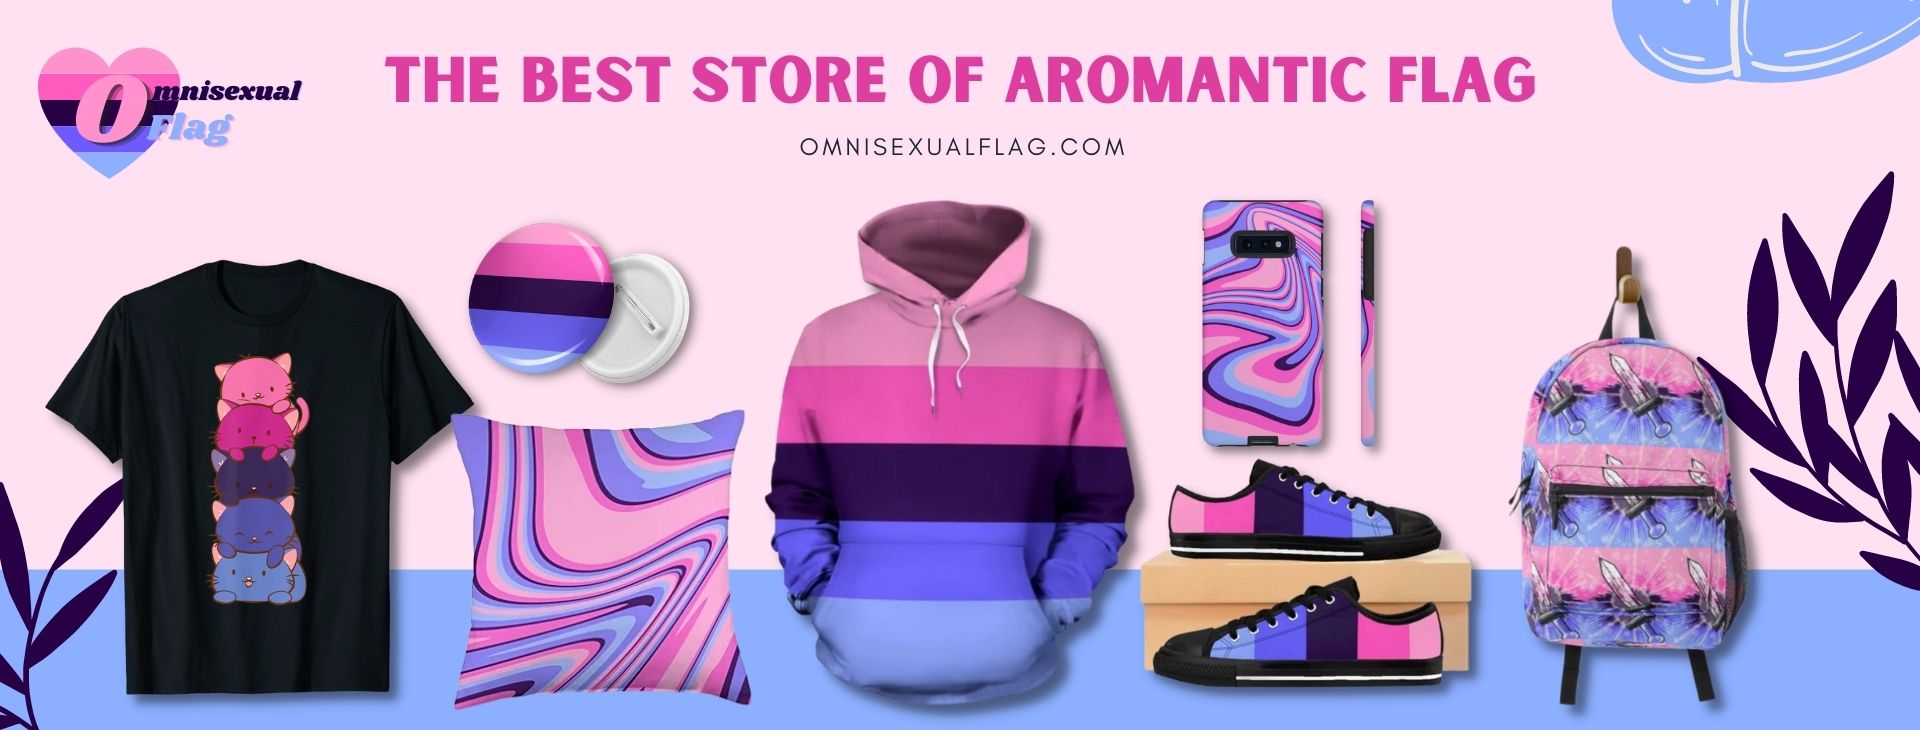 Omnisexual Flag Store Banner 1920x730px 1 - Omnisexual Flag™